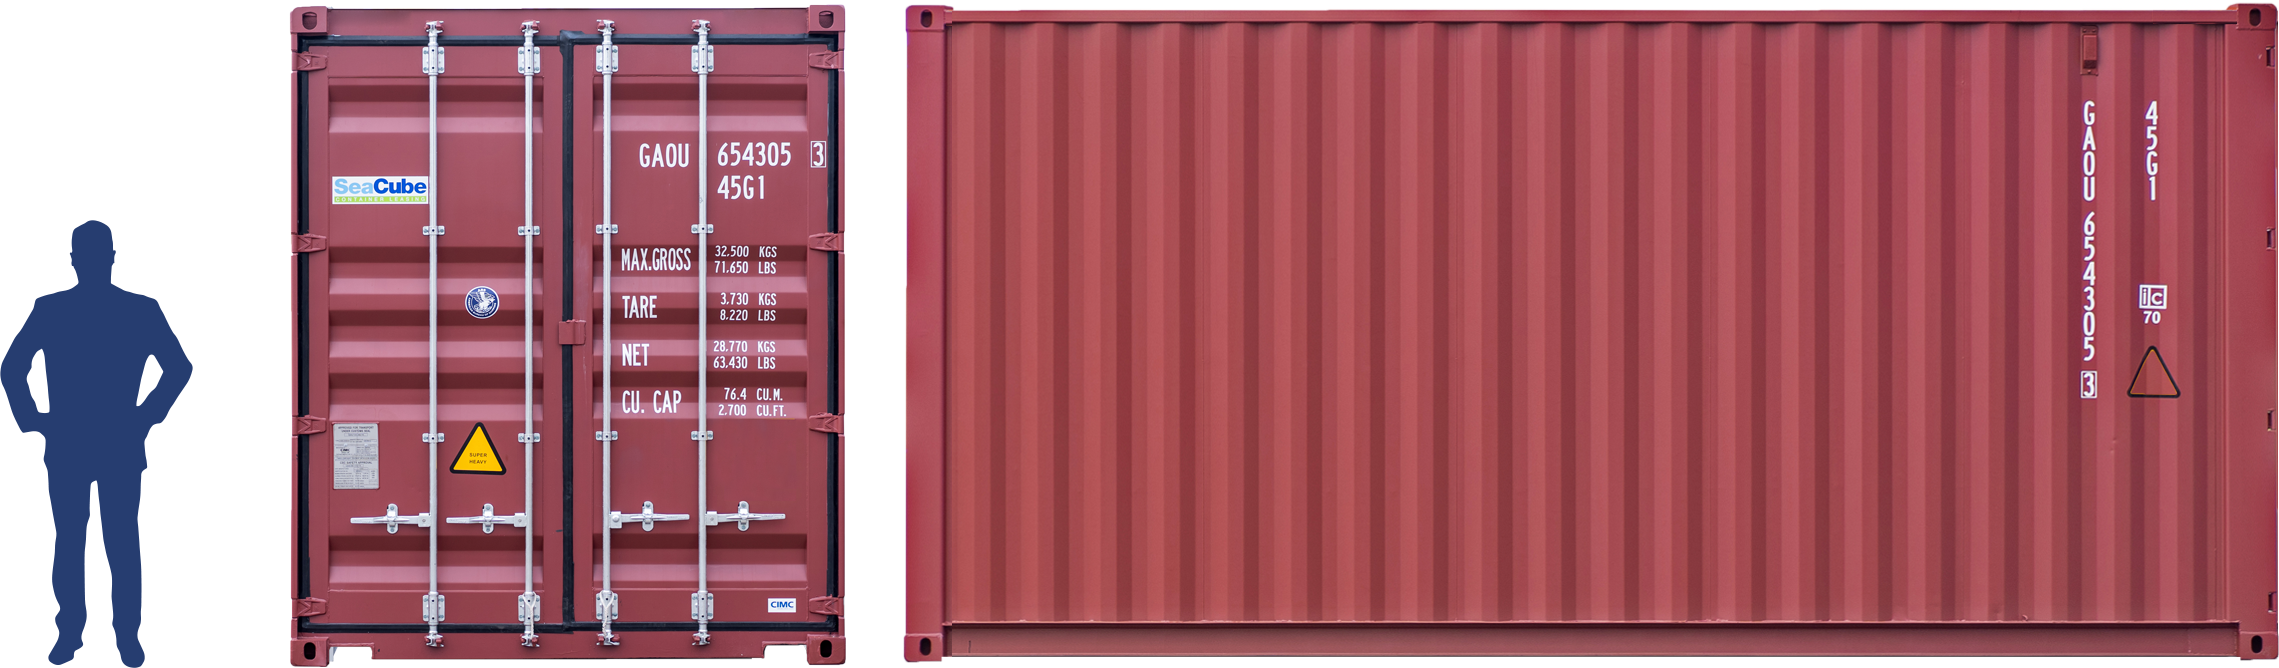 20 foot dry shipping container